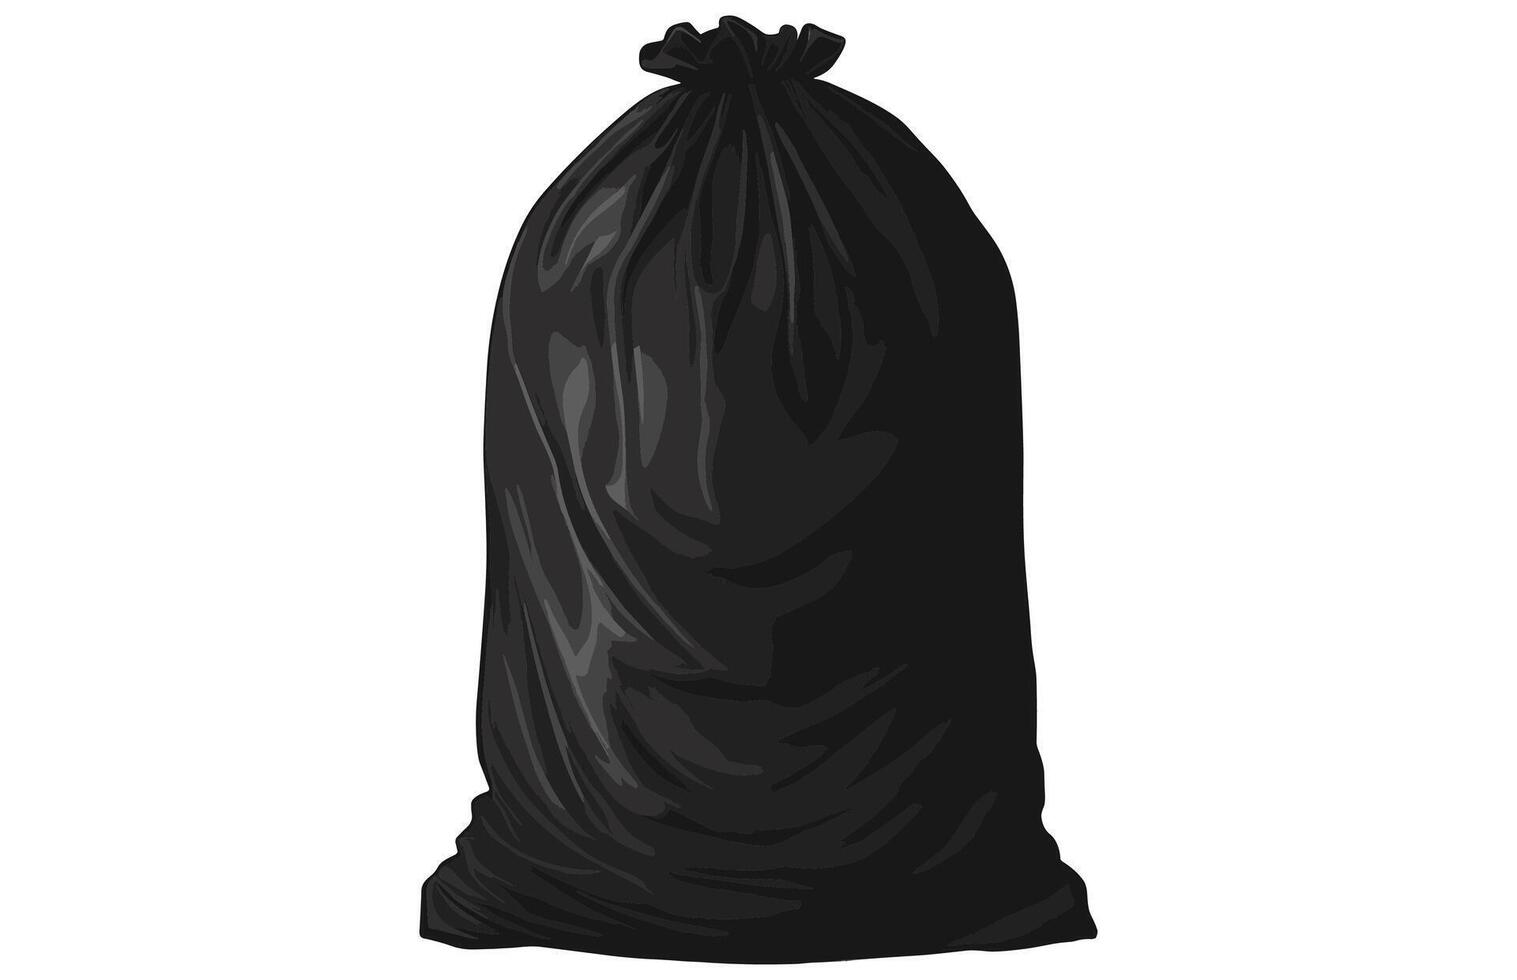 Rubbish bag silhouette icon,Packages with garbage vector illustration of big black plastic bags.